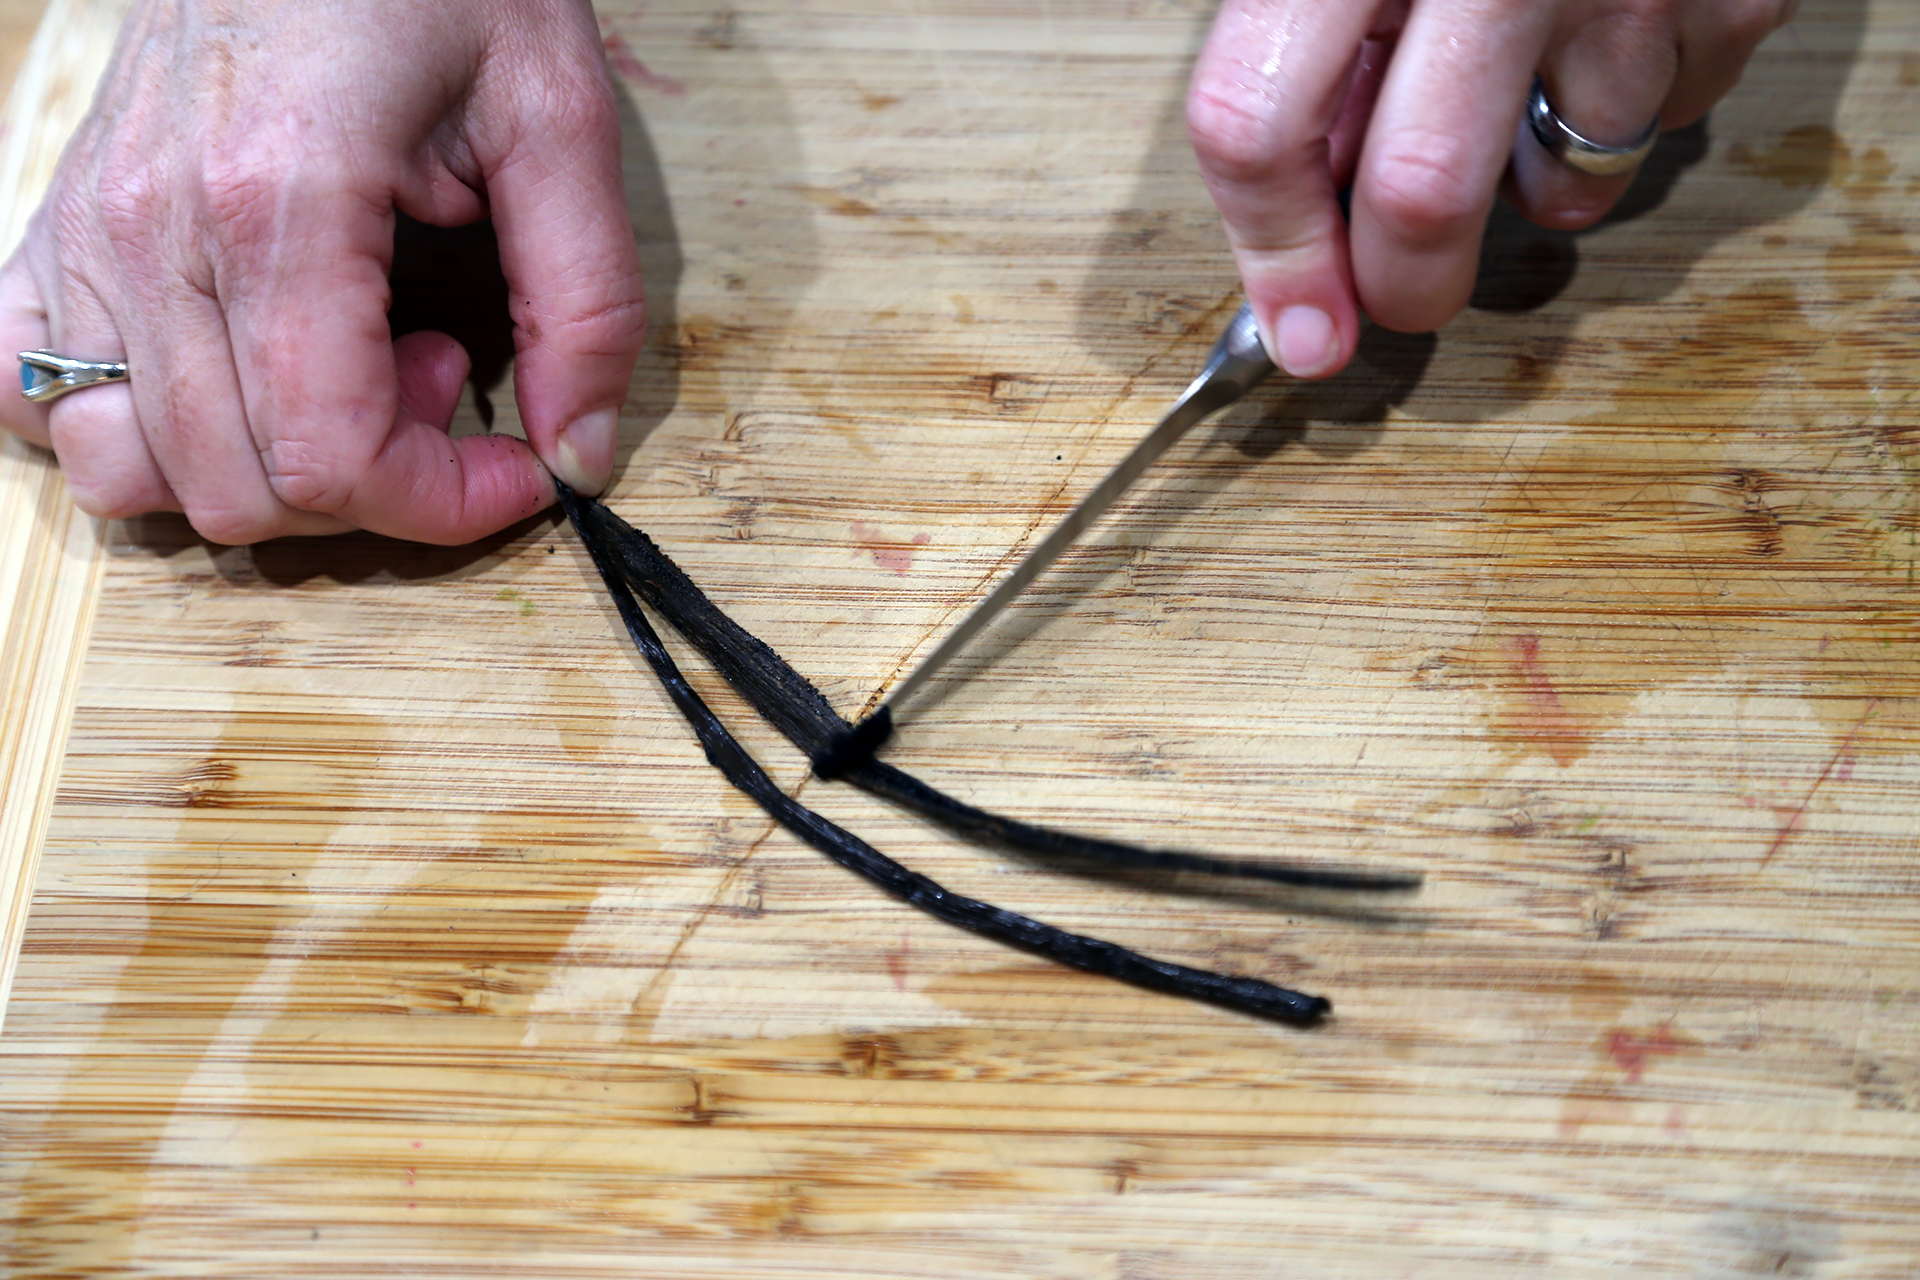 Using a paring knife, split the vanilla bean lengthwise, then, using the back of the knife, gently scrape the seeds from the pod.